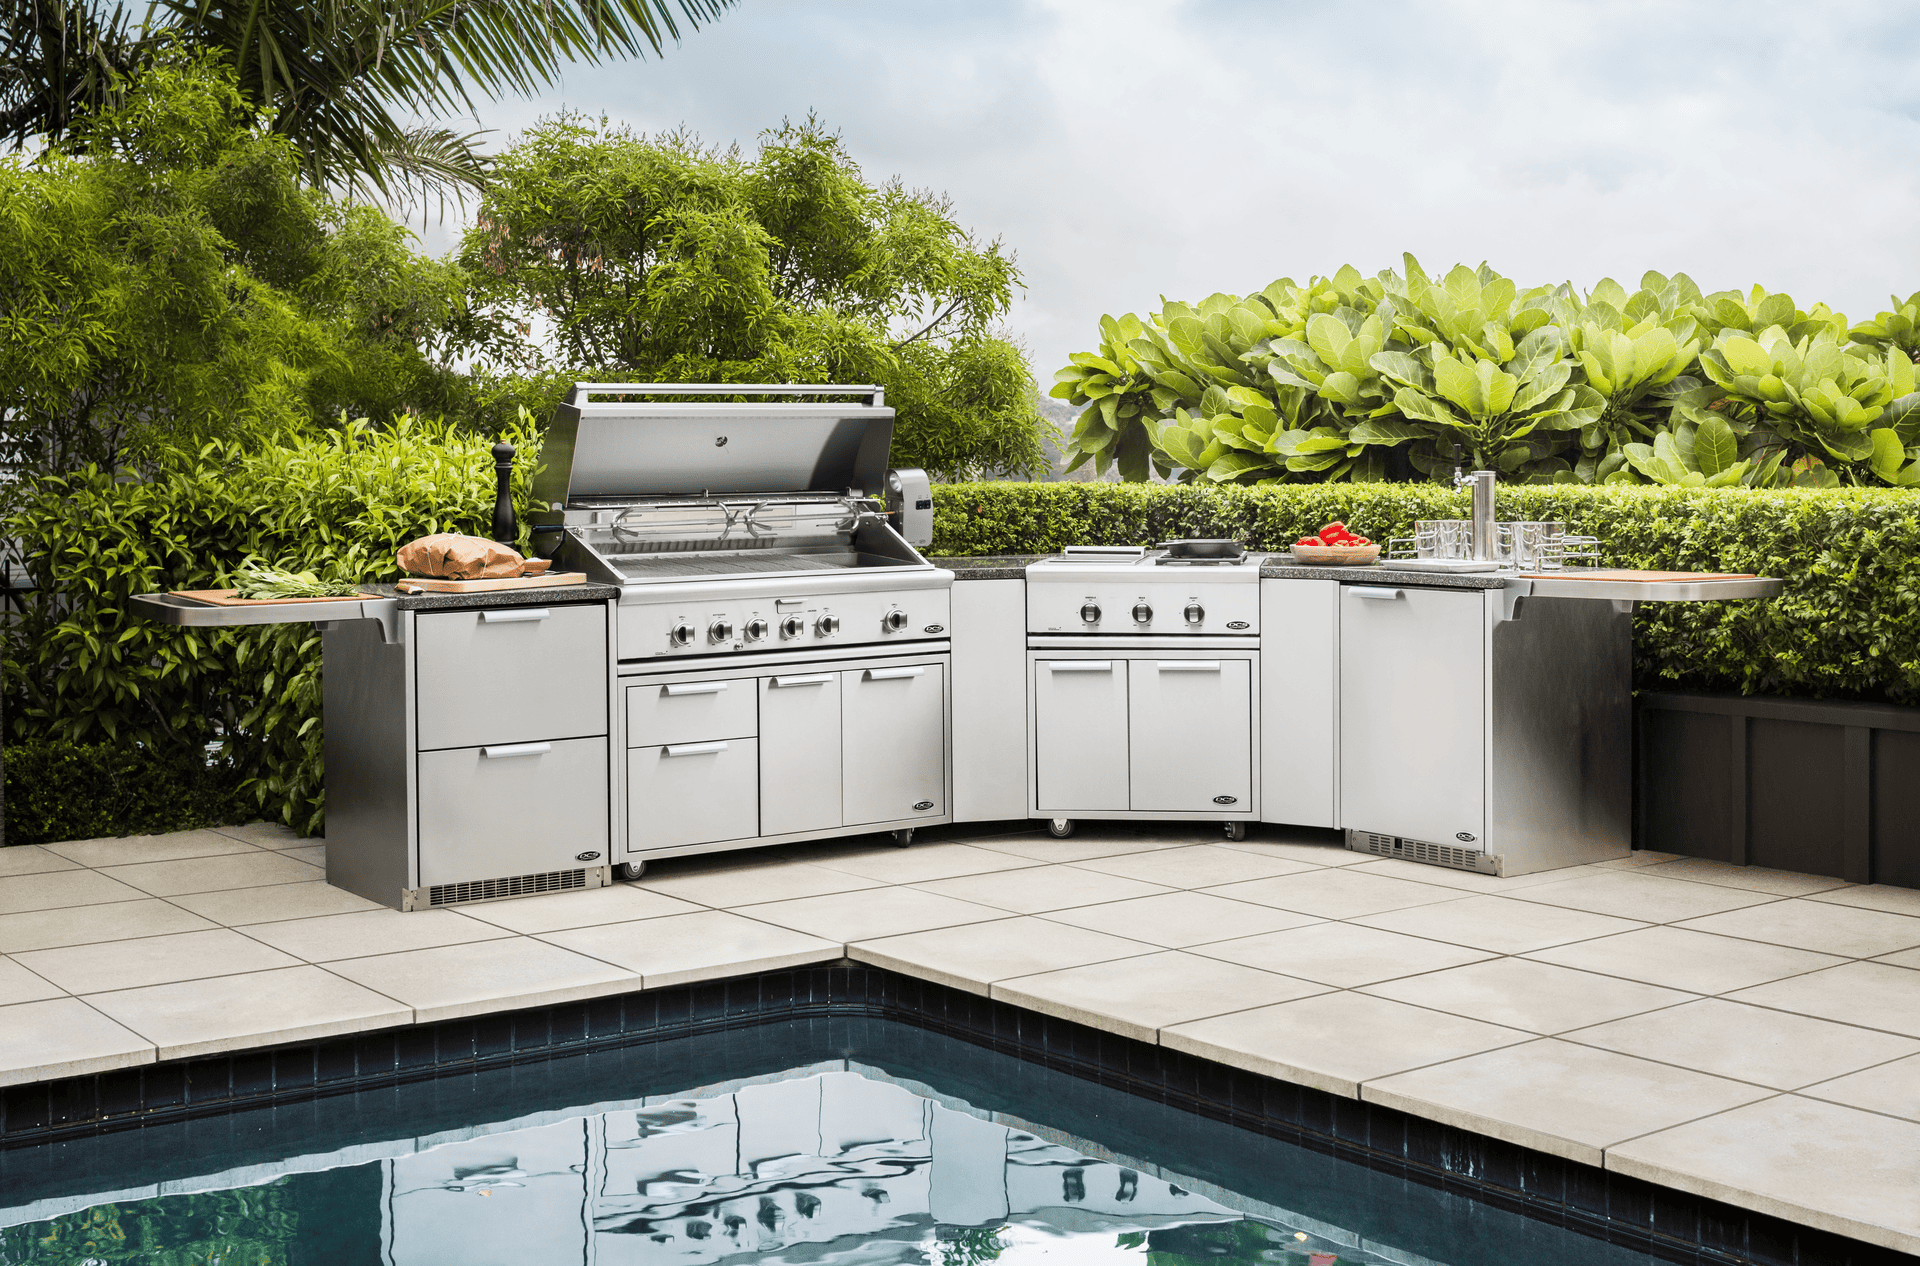 Need help deciding which appliances to add to your outdoor kitchen in Wexford, Zelienople, or Cranberry Township? Call the Lawns & Beyond team!